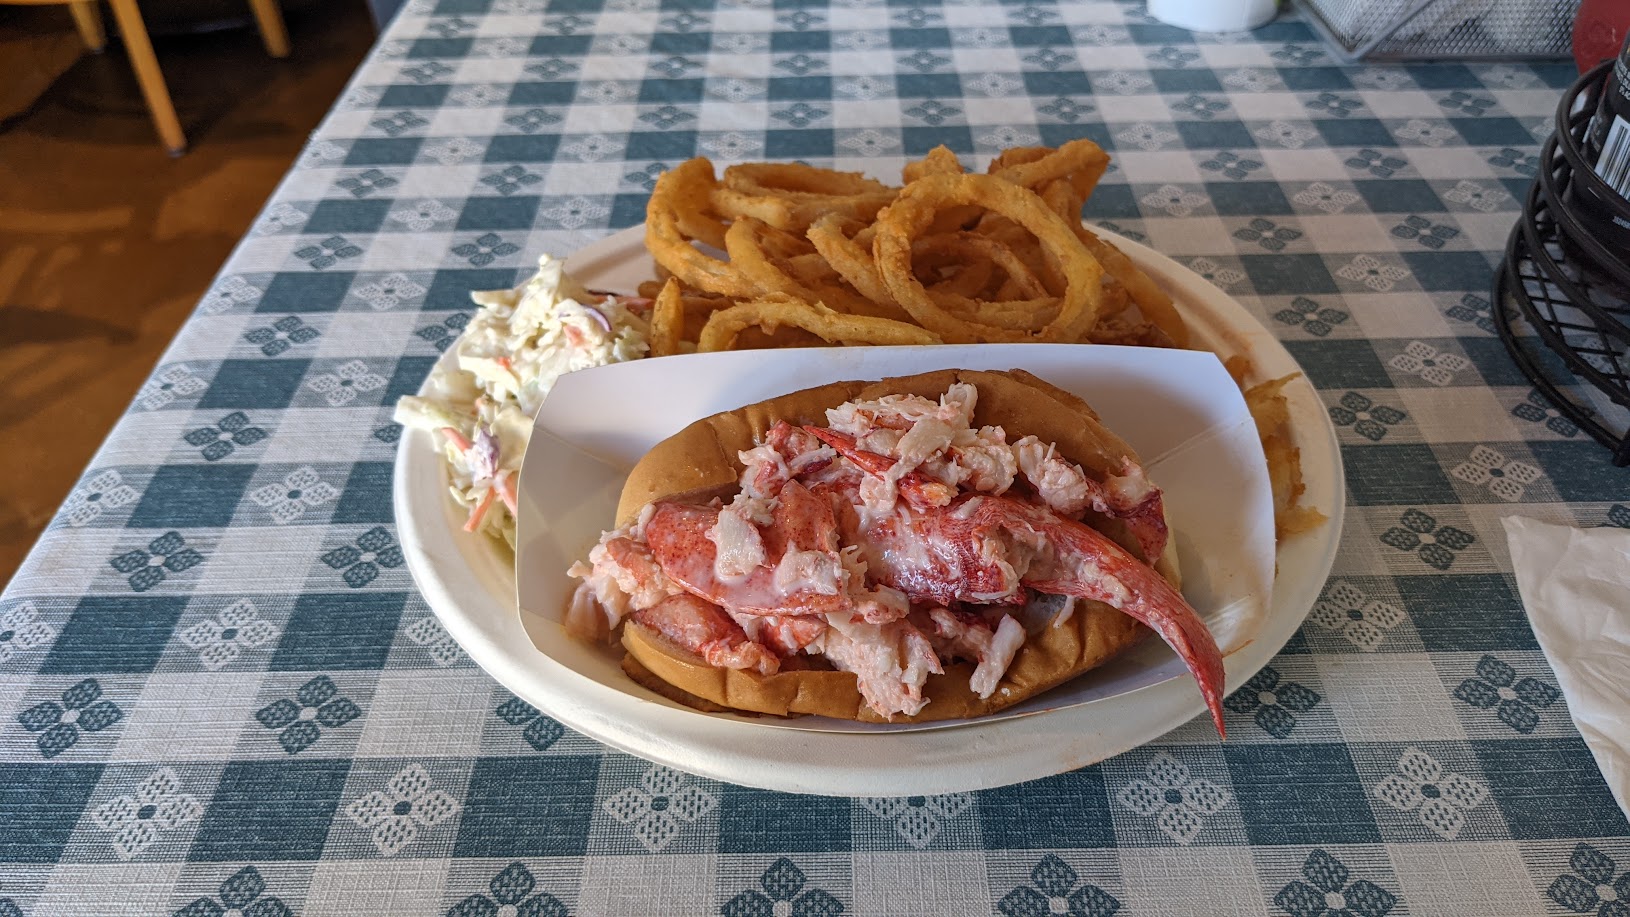 Pete’s Seafood and Sandwich